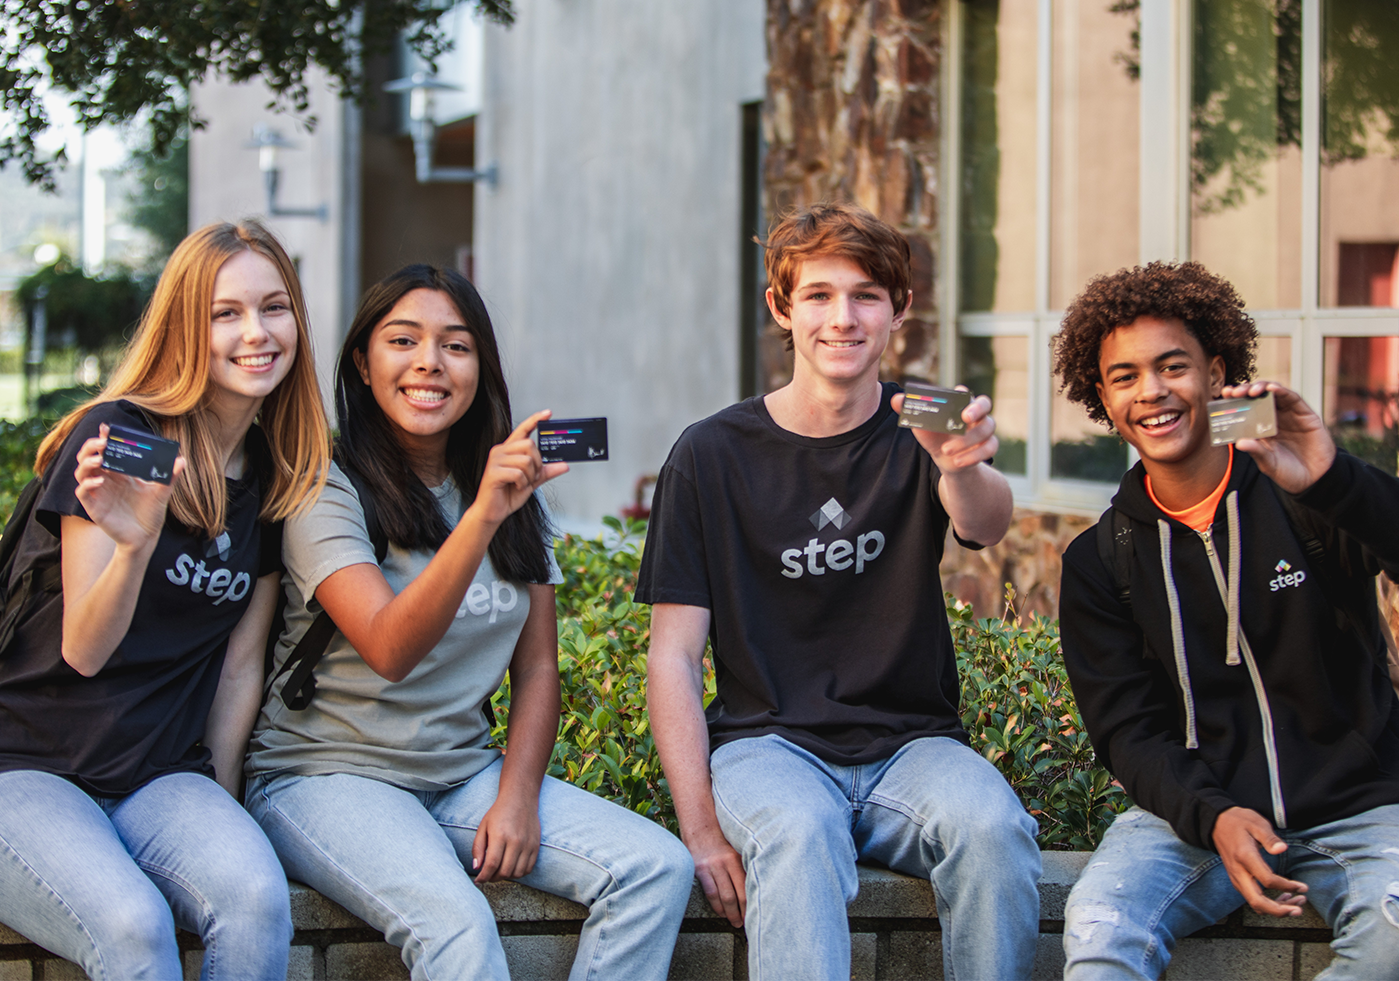 Step raises $22.5M led by Stripe to build no-fee banking services for teens